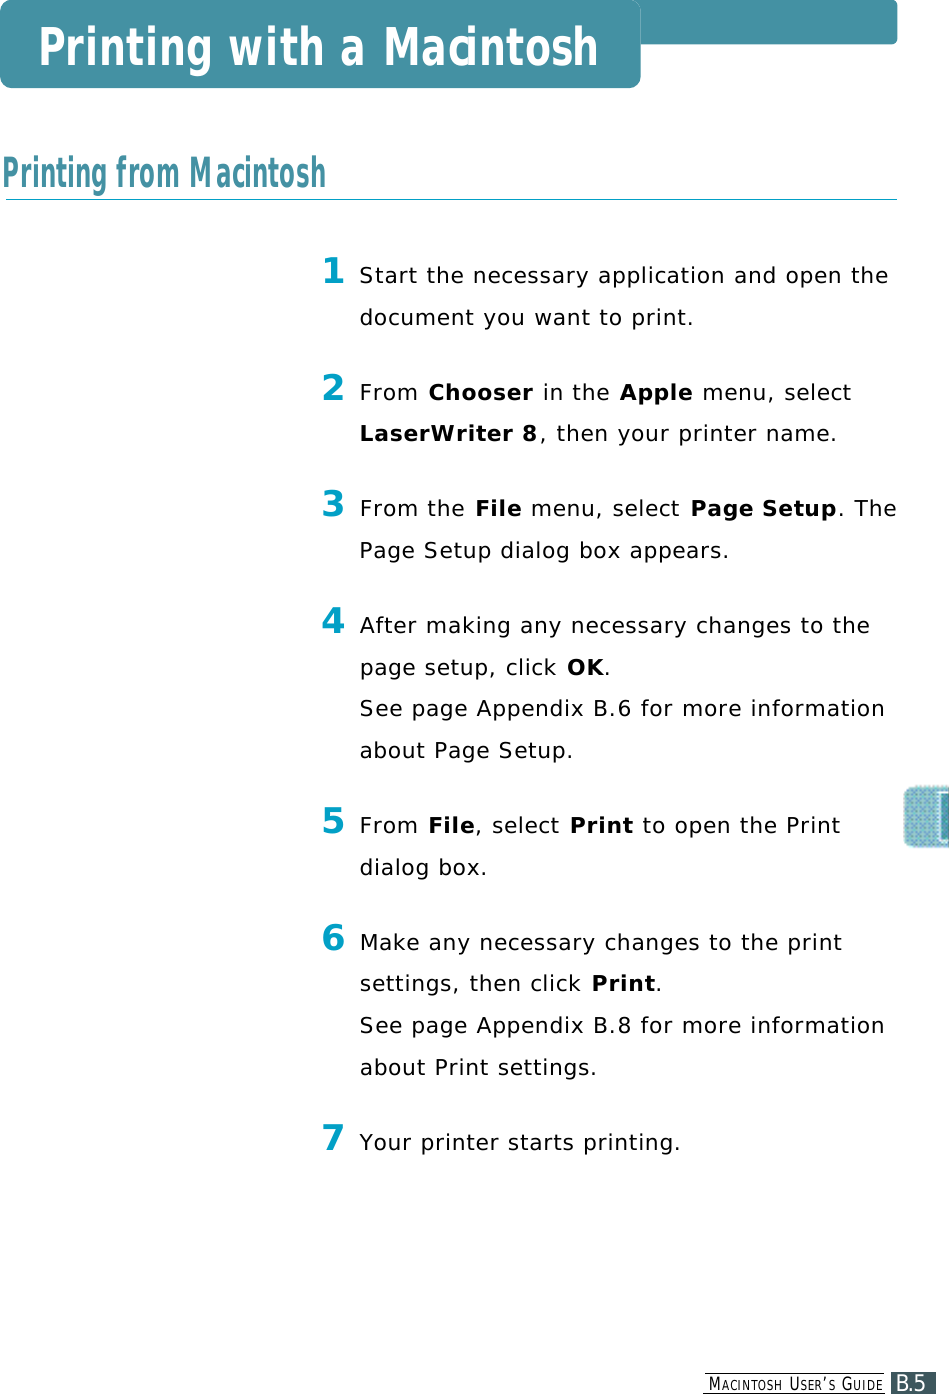 1Start the necessary application and open thedocument you want to print.2From C h o o s e r in the A p p l e menu, selectLaserWriter 8, then your printer name.3From the F i l e menu, select Page Setup. ThePage Setup dialog box appears.4After making any necessary changes to thepage setup, click O K . See page Appendix B.6 for more information about Page Setup.5F r o m F i l e , select P r i n t to open the Printdialog box .6M a ke any necessary changes to the printsettings, then click P r i n t .See page Appendix B.8 for more information about Print settings.7Your printer starts printing.Printing with a MacintoshPrinting from MacintoshB.5MA C I N T O S H US E R ’SGU I D E